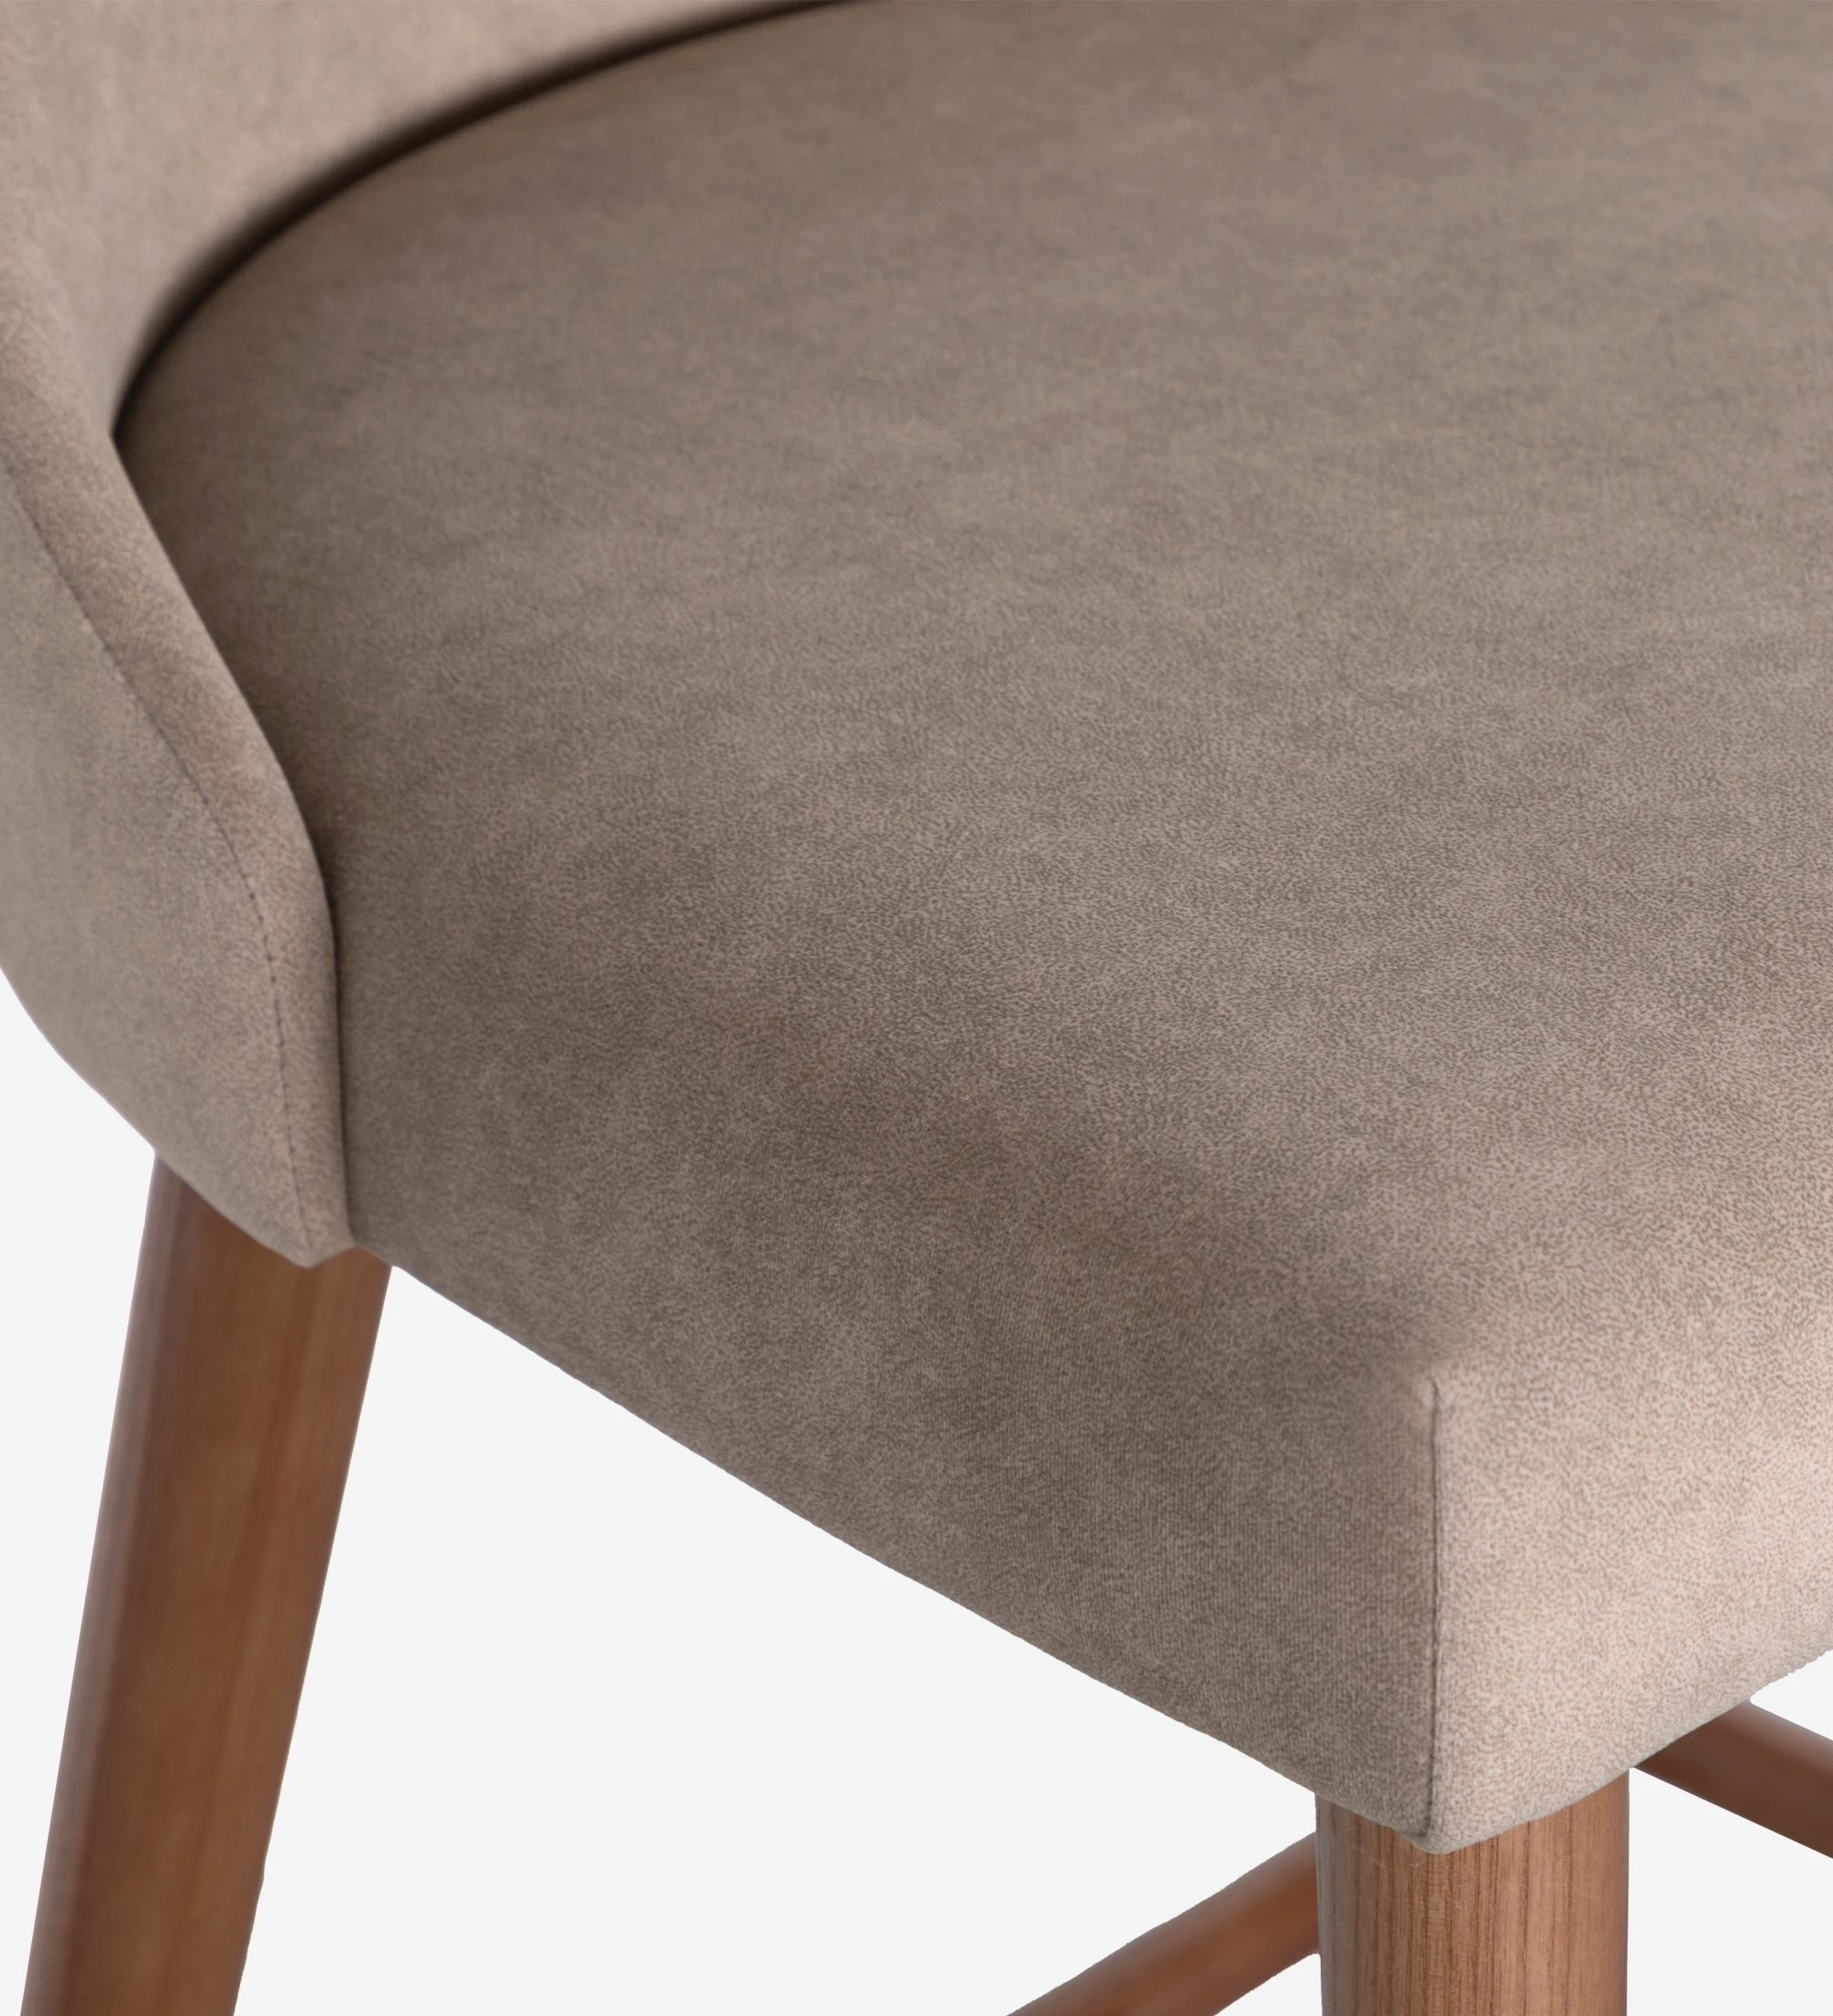 Oslo high stool upholstered in fabric, legs in walnut wood.